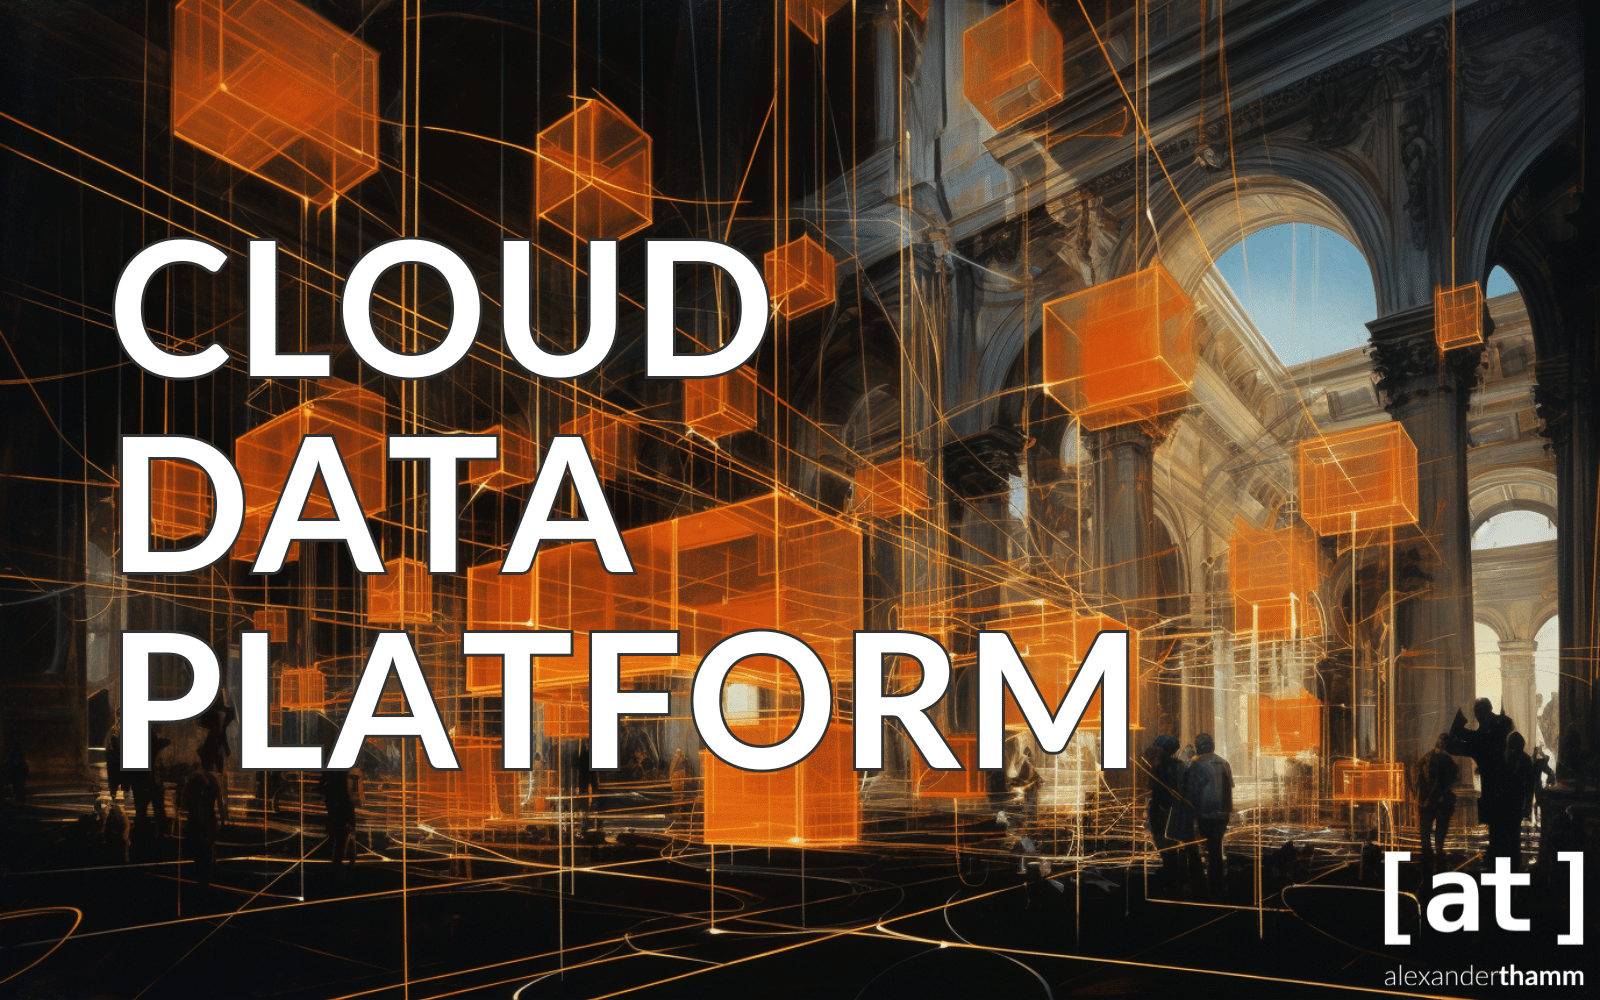 Cloud Data Platform, a religious architecture with numerous data points and links